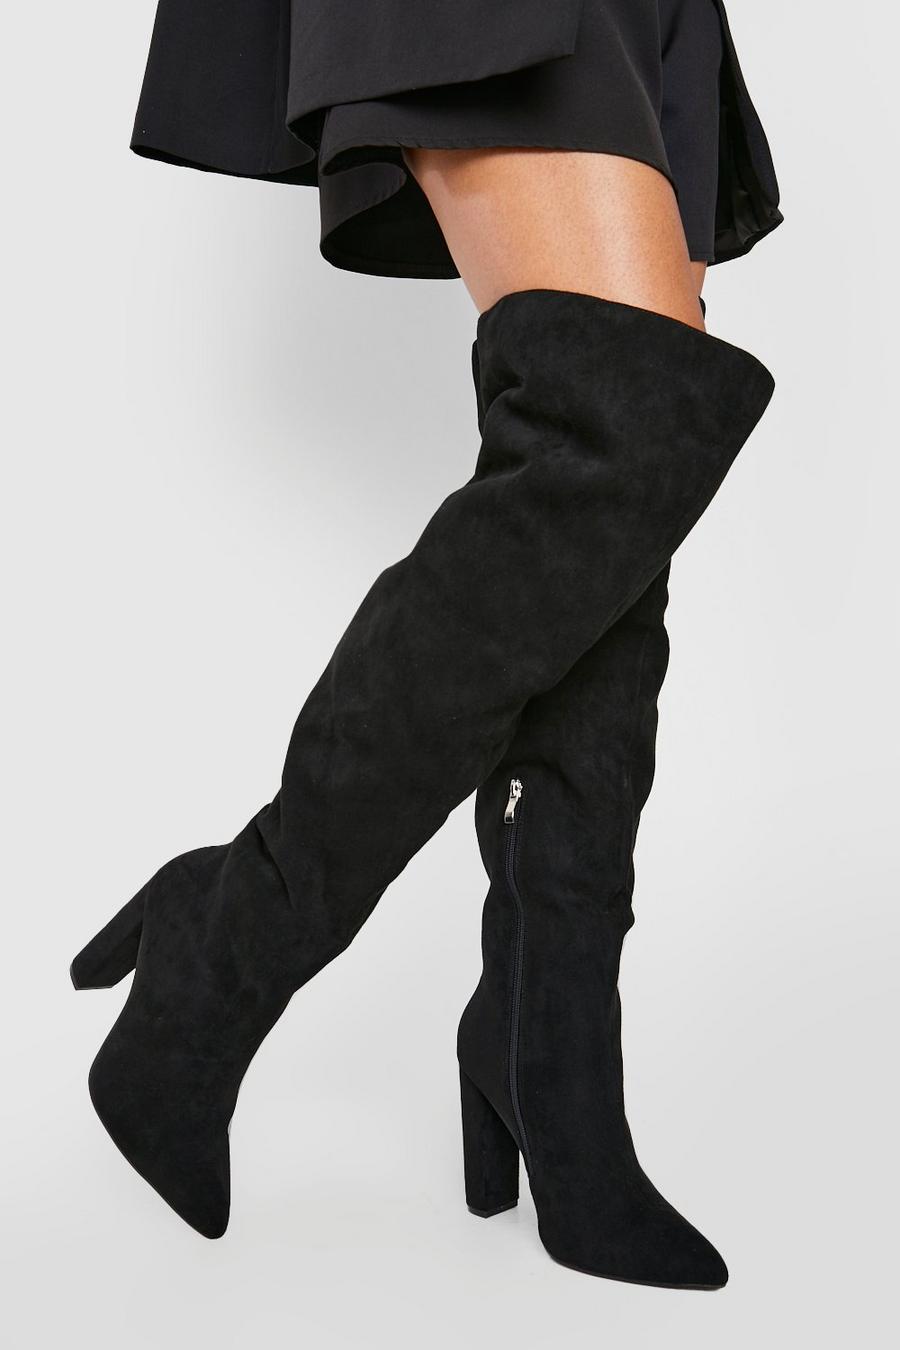 Black Wide Fit Thigh High Block Heeled Boots